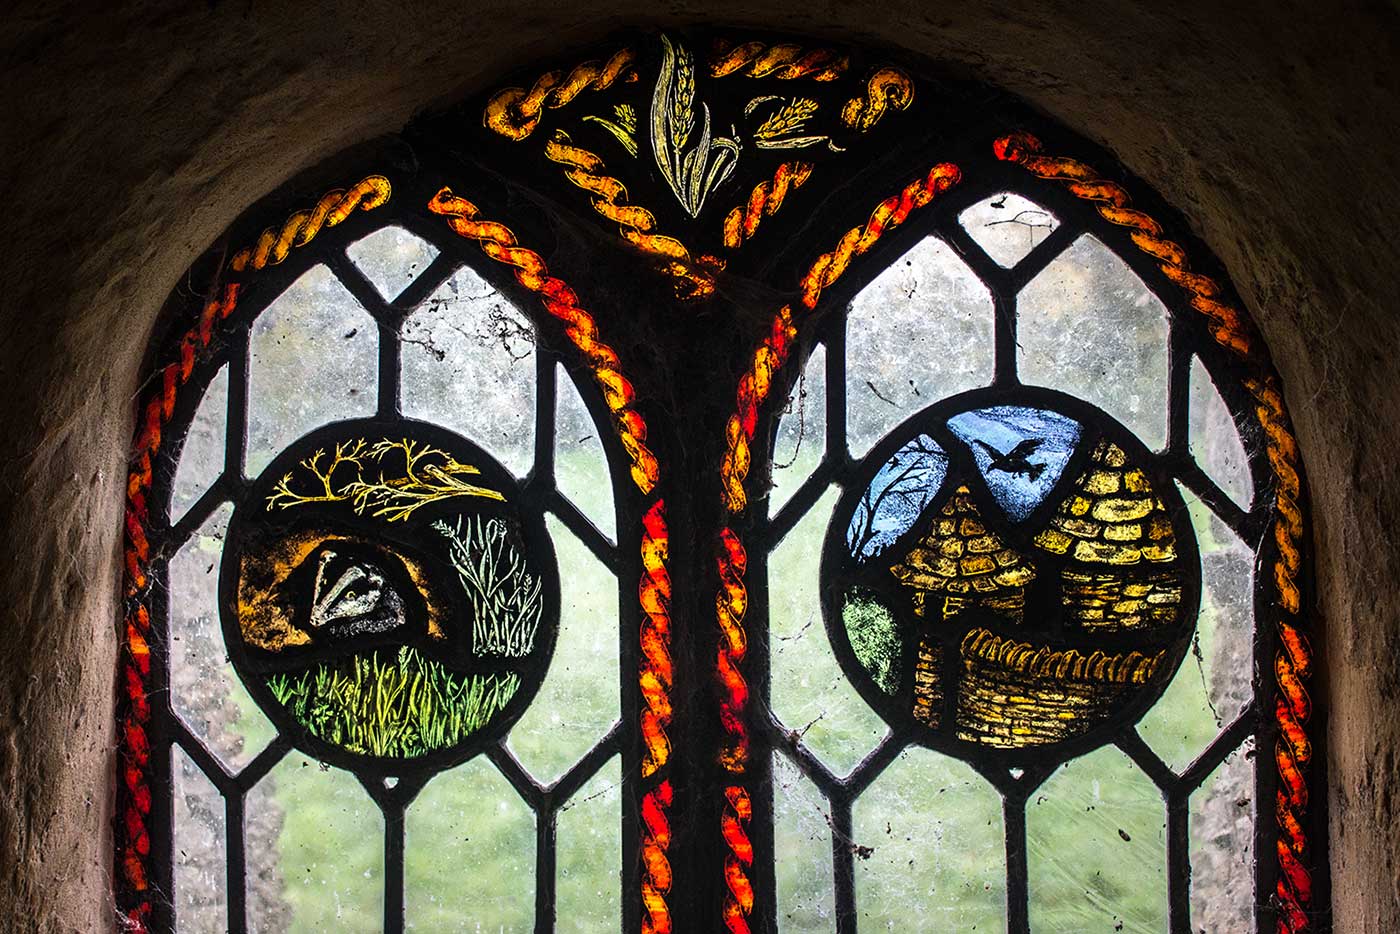 This window in Colin’s Barn features a badger, and a depiction of the barn itself.